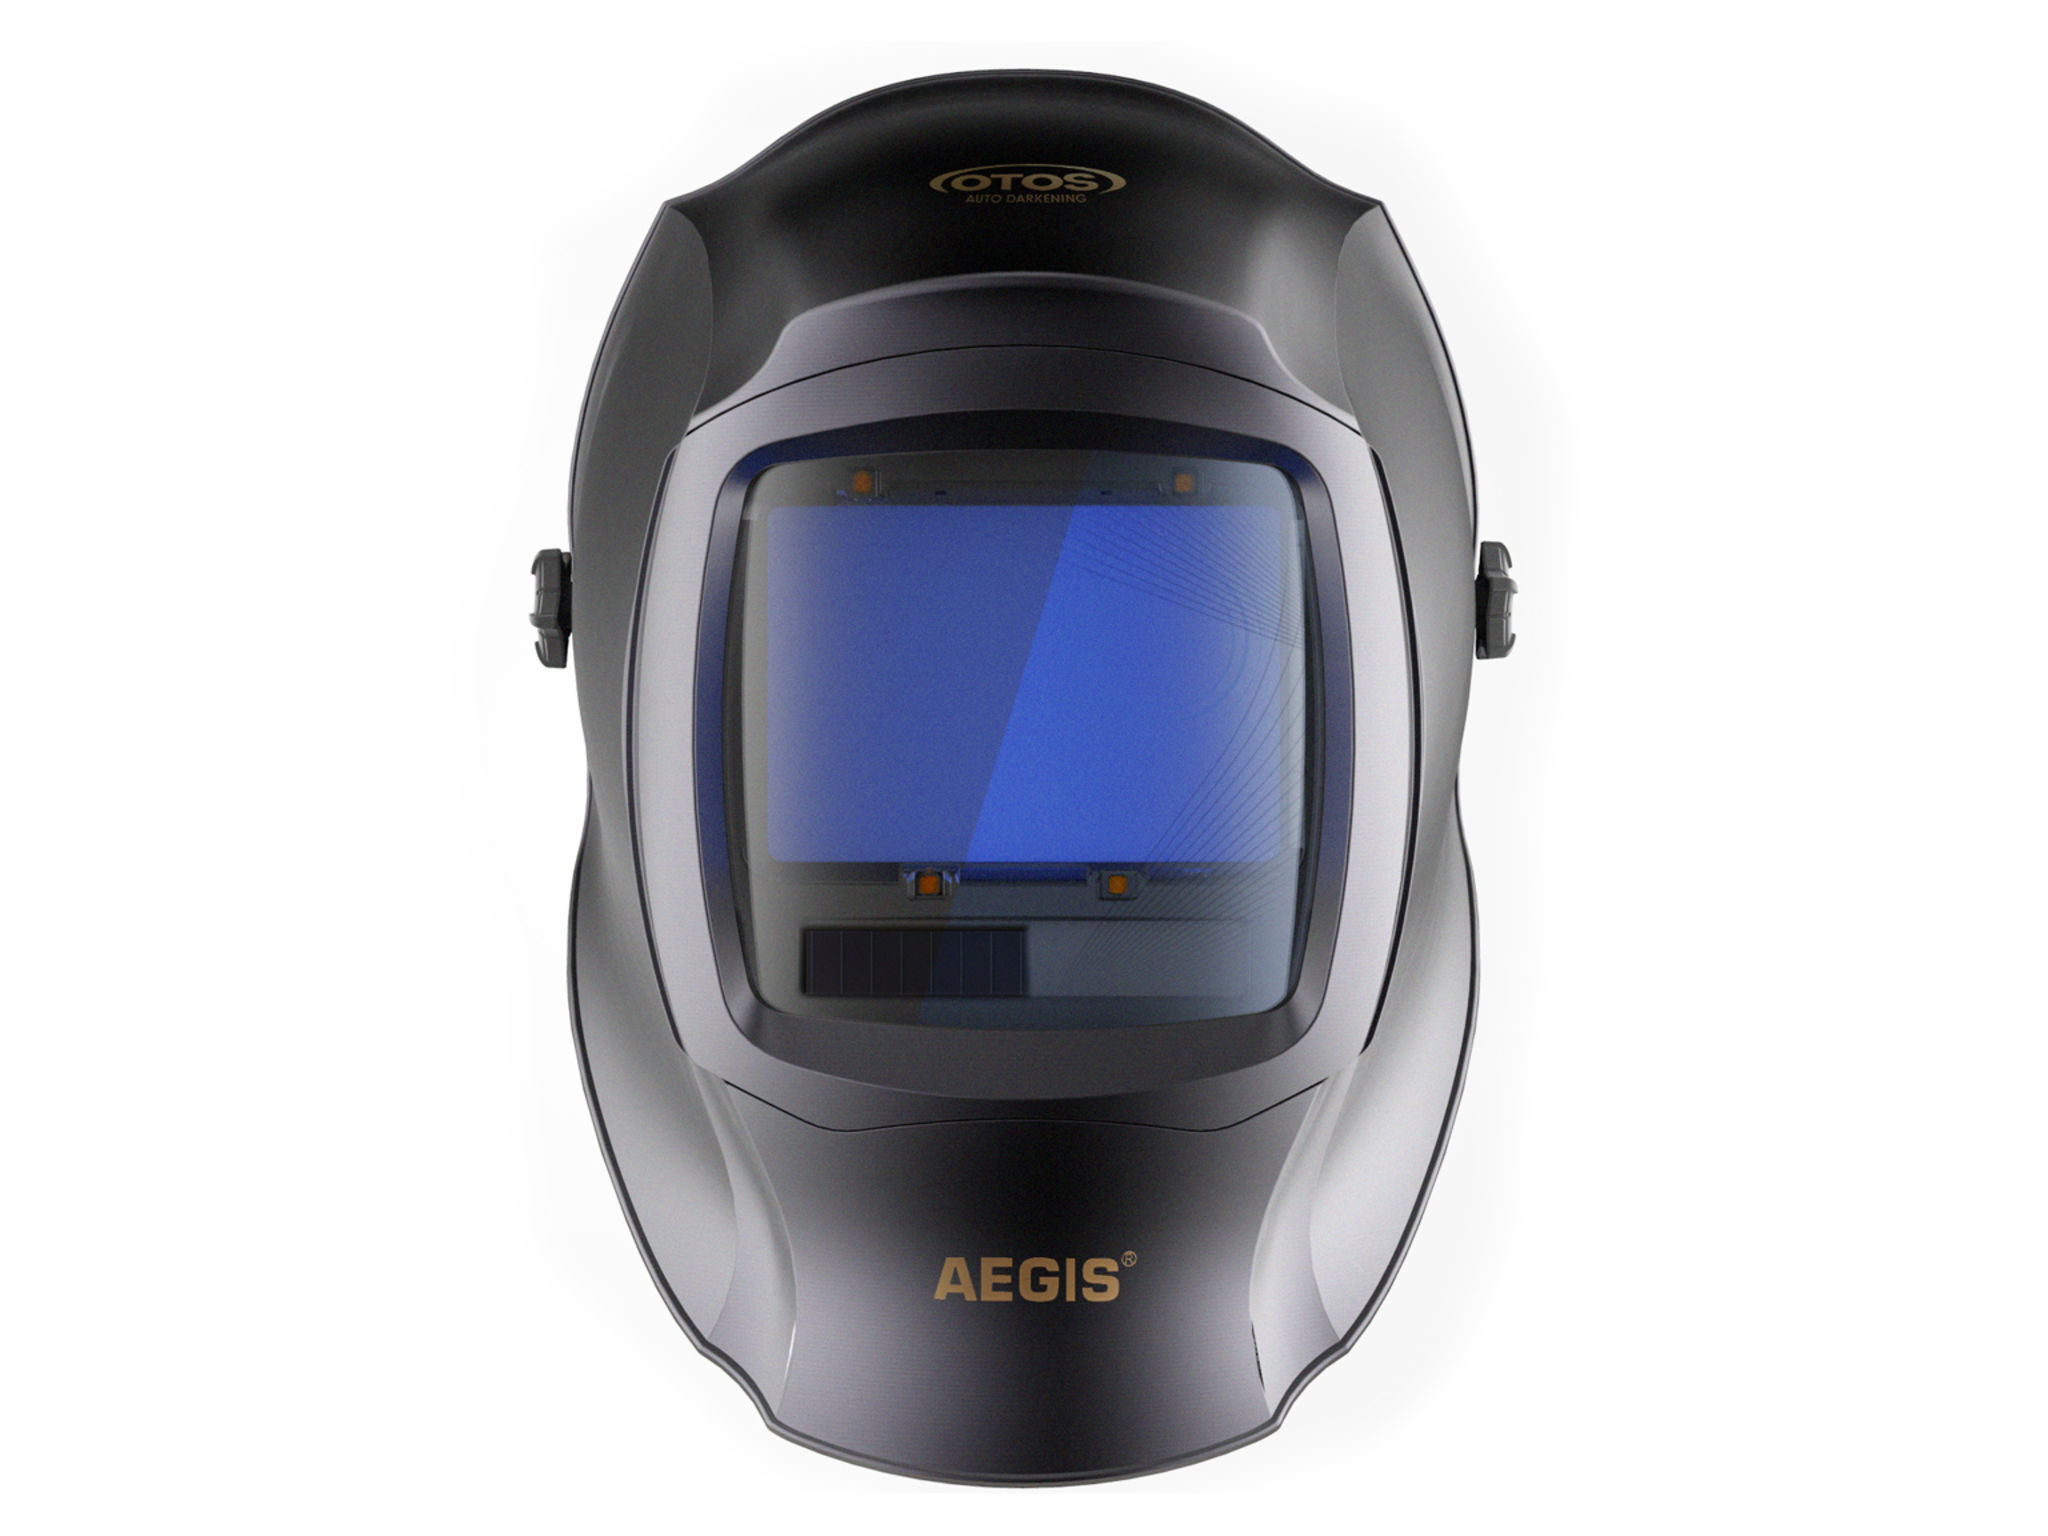 AEGIS – WIDE VIEWING ANGLE